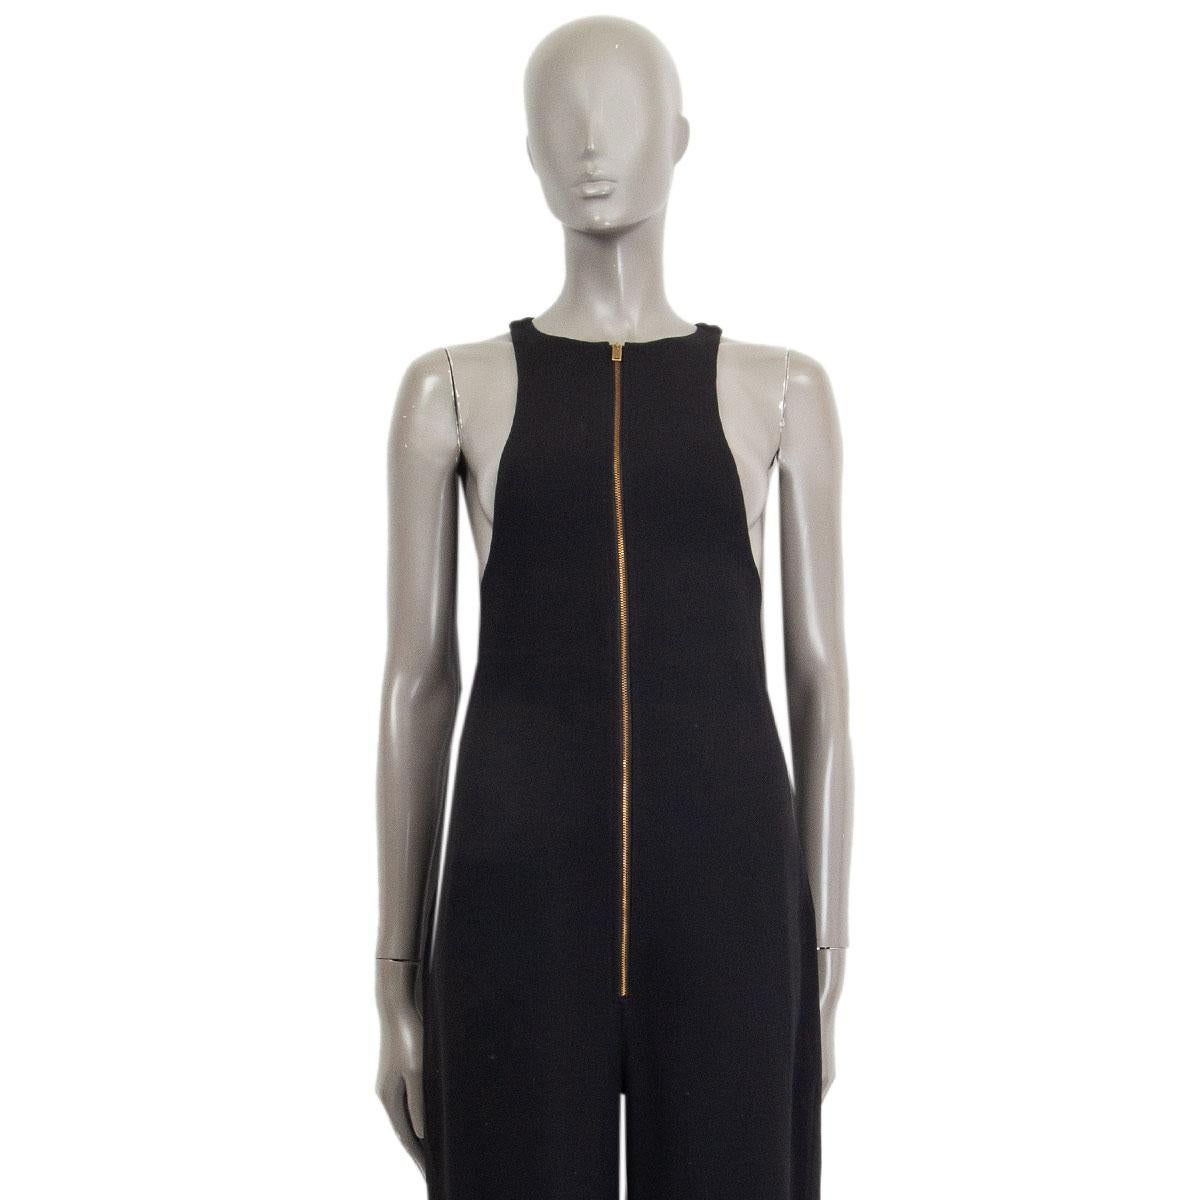 100% authentic Celine sleeveless racer style top-part, zipped jumpsuit in black viscose blend (missing content tag). Closes with a gold-tone zipper on the front and with slit pockets on the side. Unlined. Has been worn and is in excellent